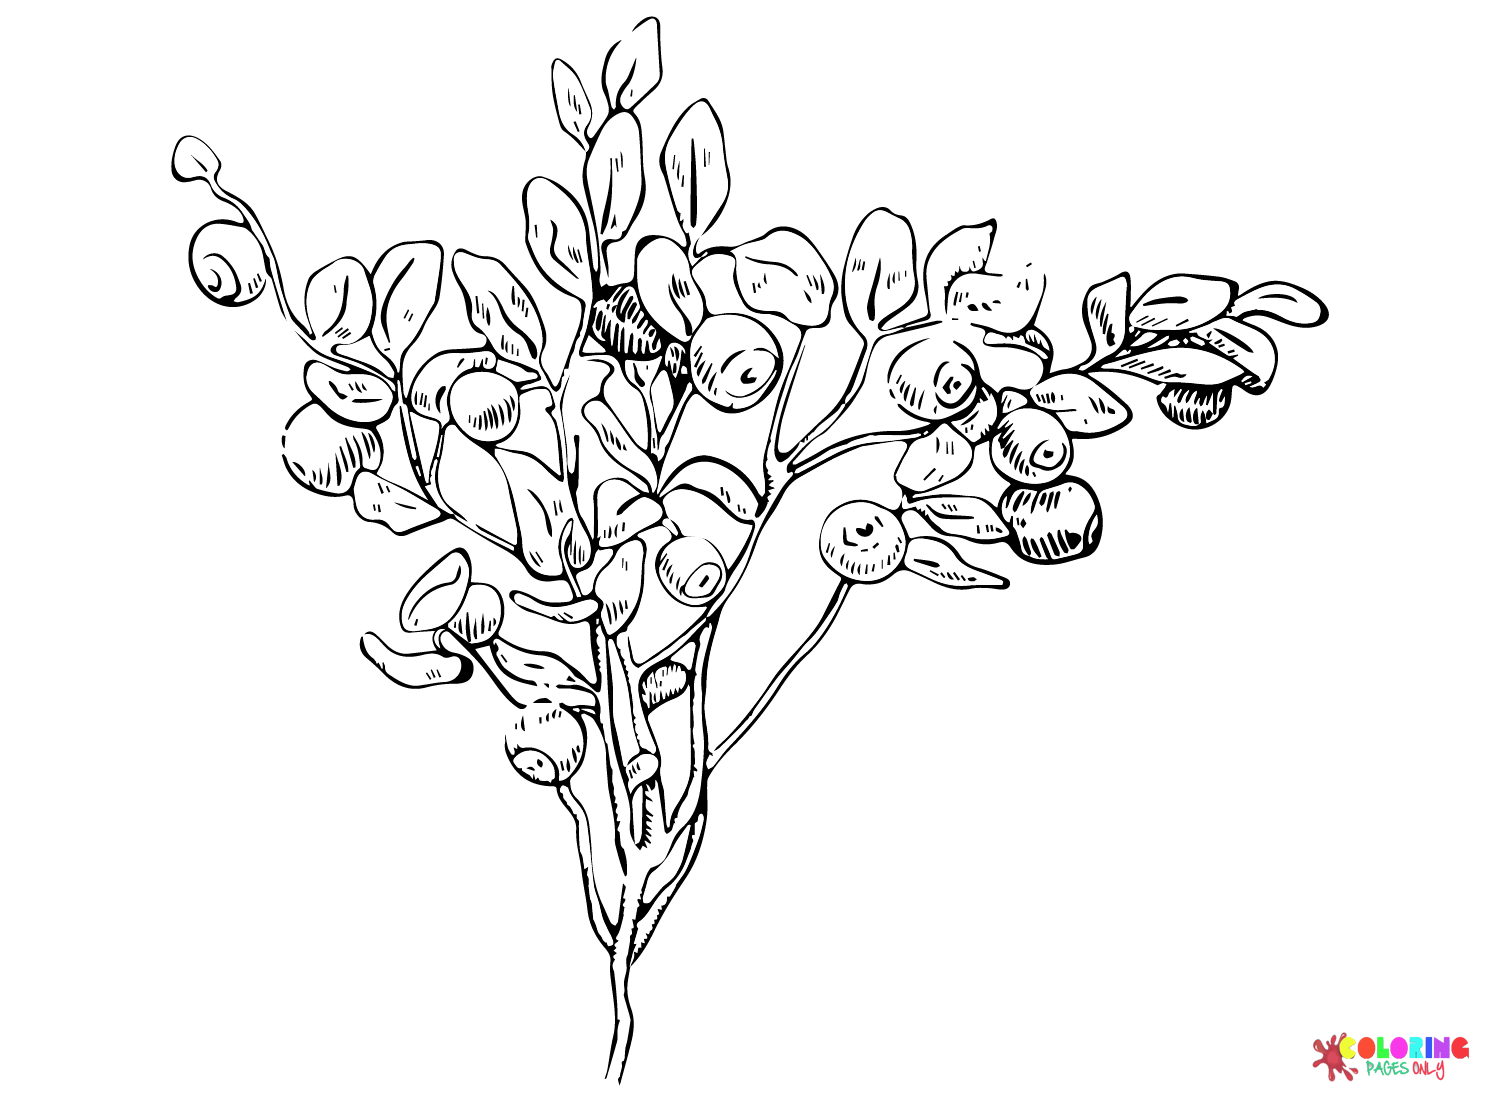 Blueberry Tree Coloring Page